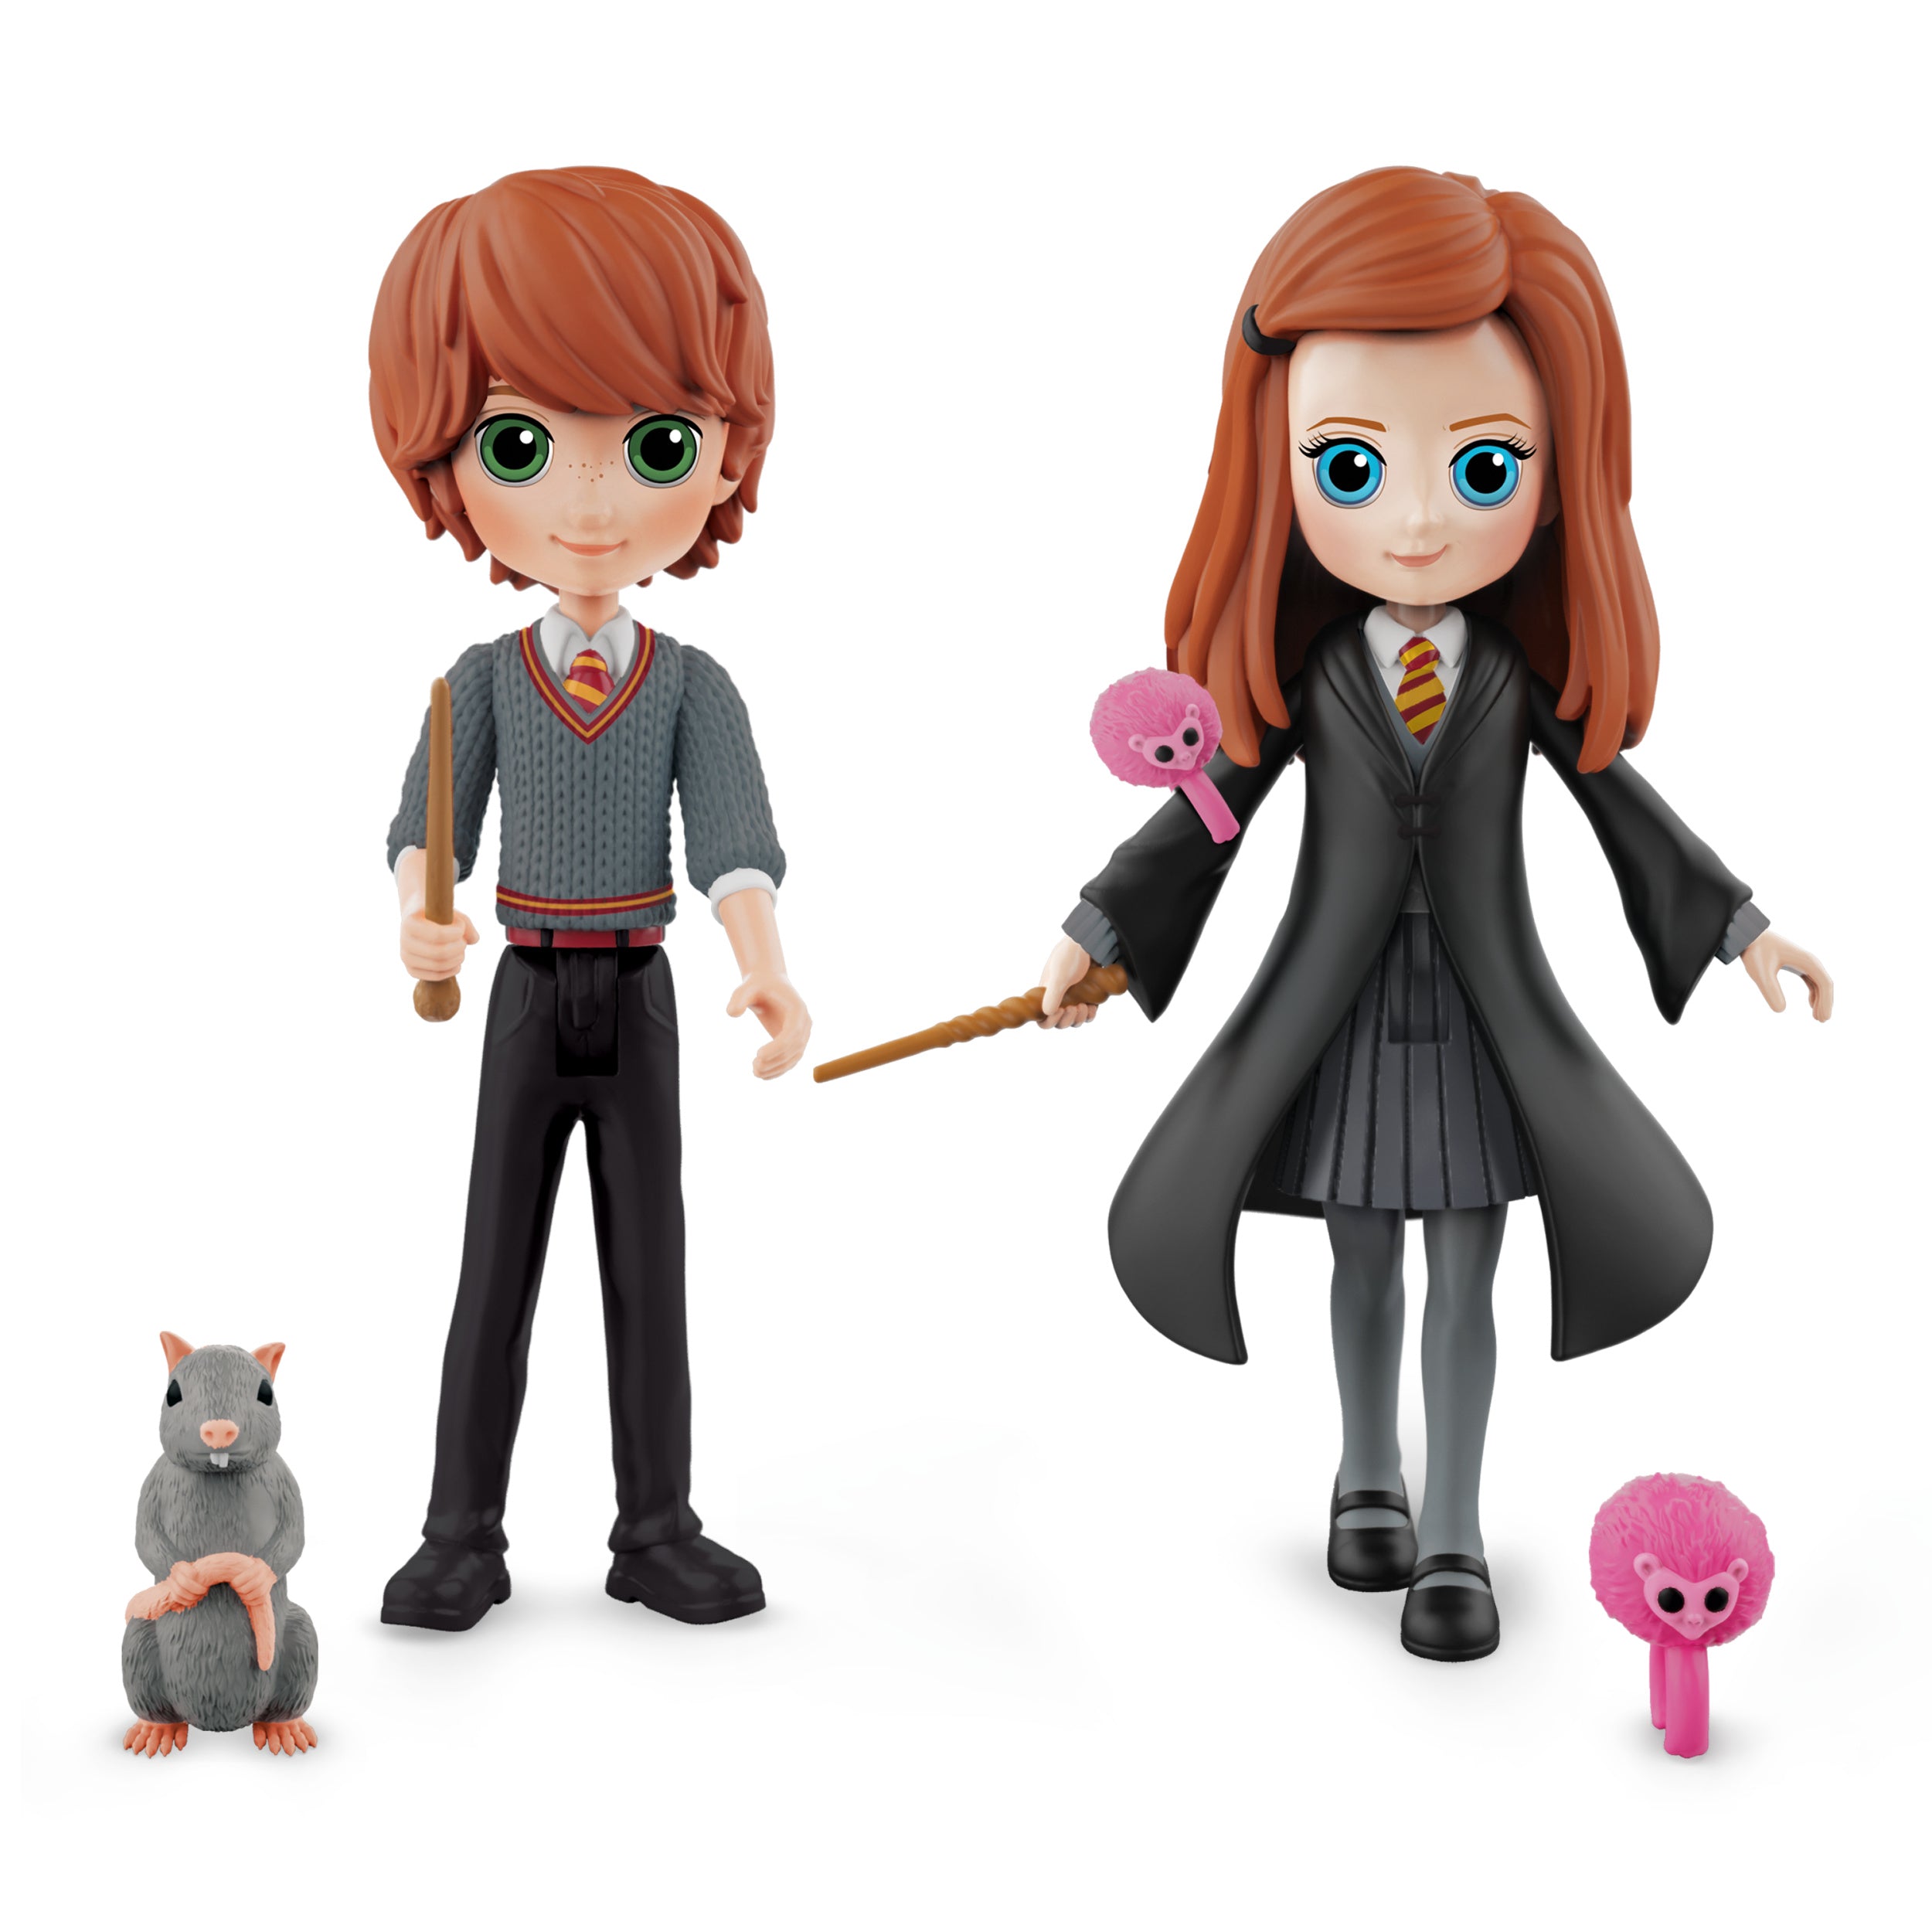 Wizarding World: Harry Potter Mini Pack Figuras Magicas - Ron Y Ginny